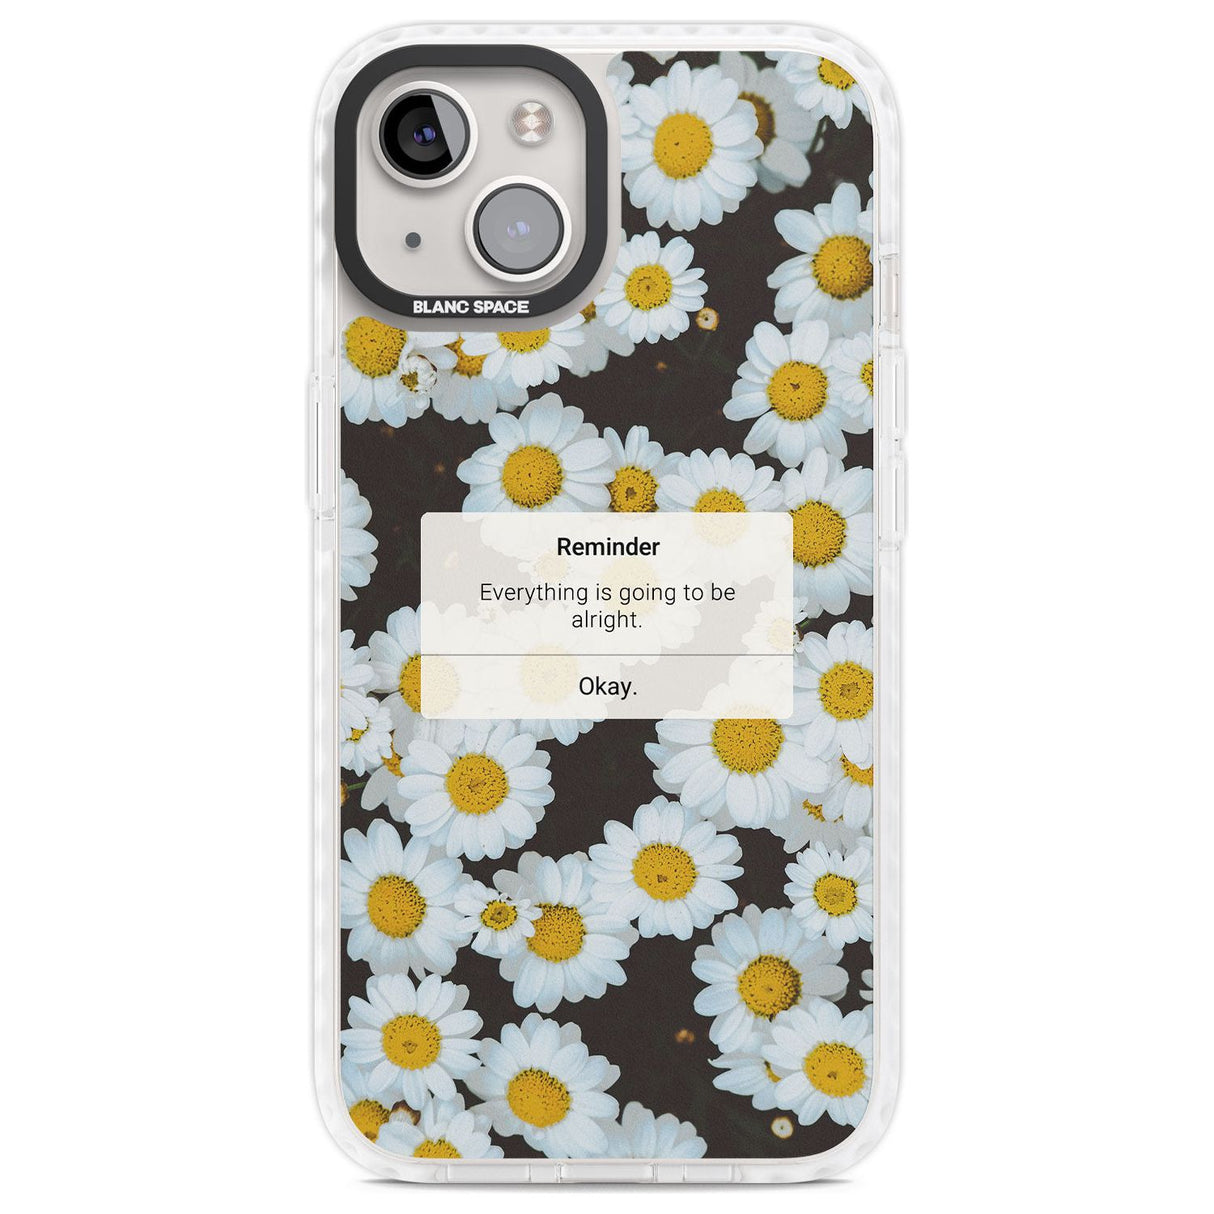 "Everything will be alright" iPhone Reminder Phone Case iPhone 13 / Impact Case,iPhone 14 / Impact Case,iPhone 15 Plus / Impact Case,iPhone 15 / Impact Case Blanc Space